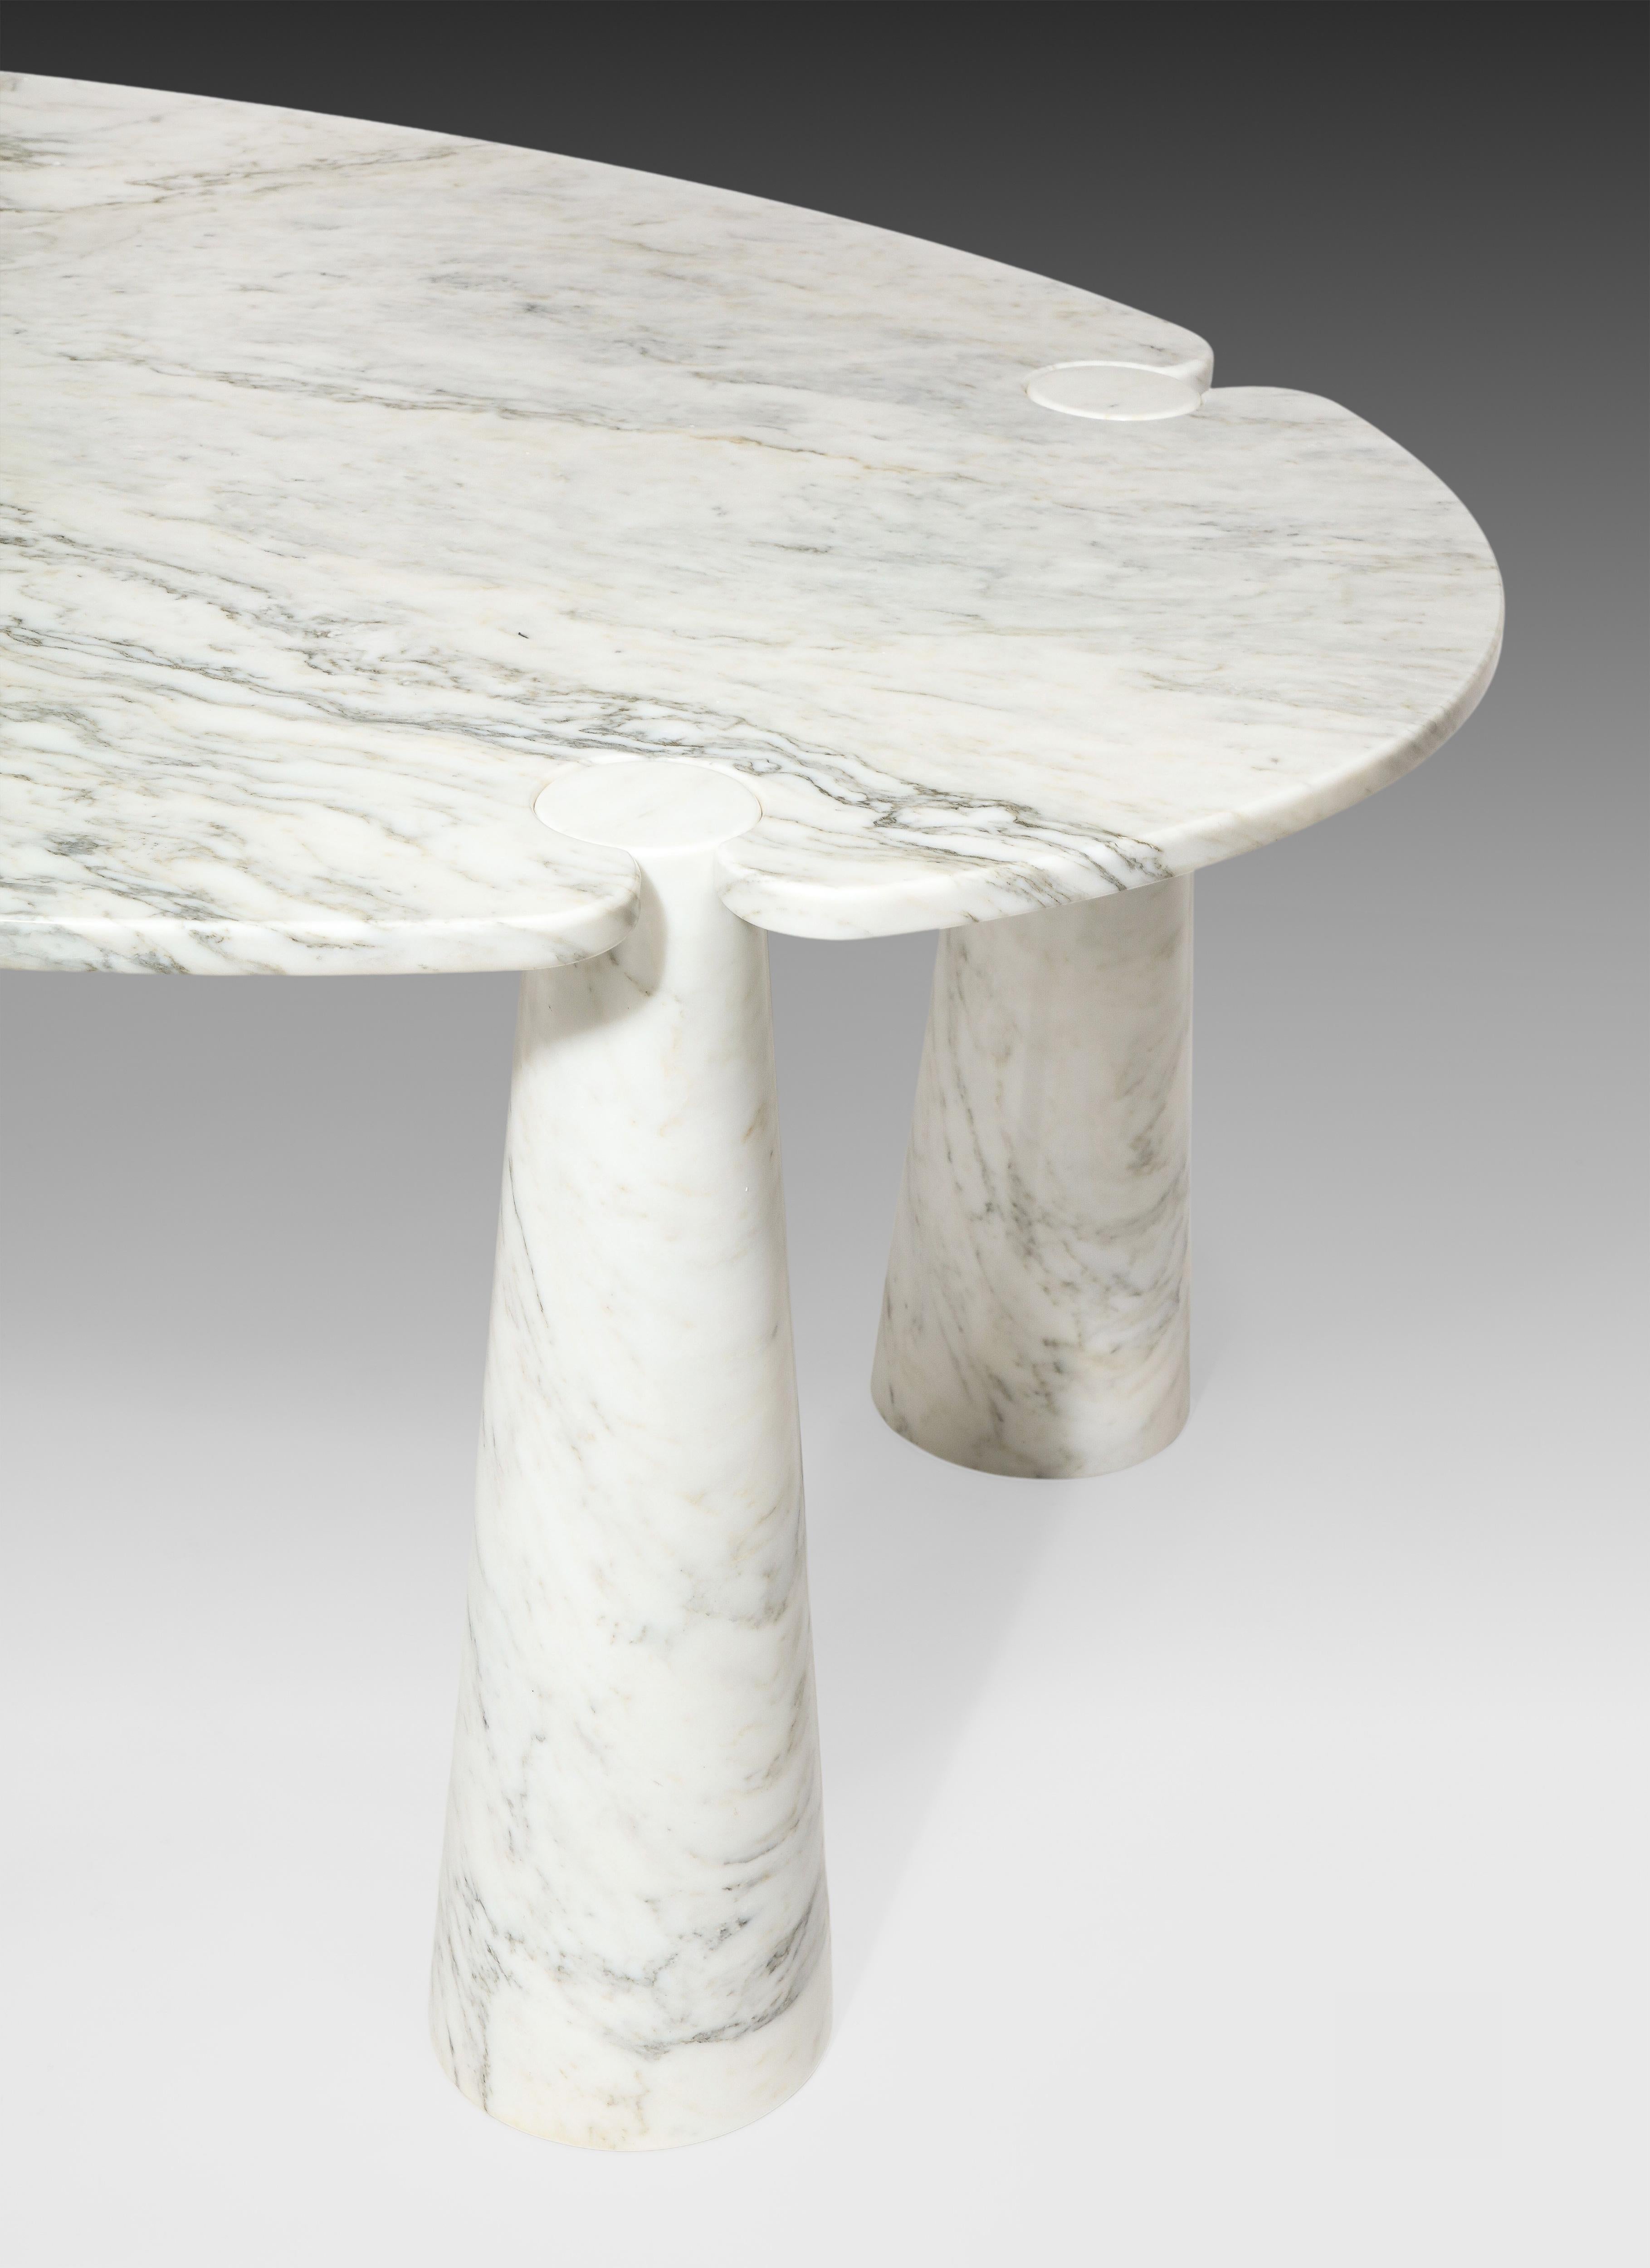 Polished Angelo Mangiarotti for Skipper Carrara Marble Dining Table from Eros Series 1971 For Sale